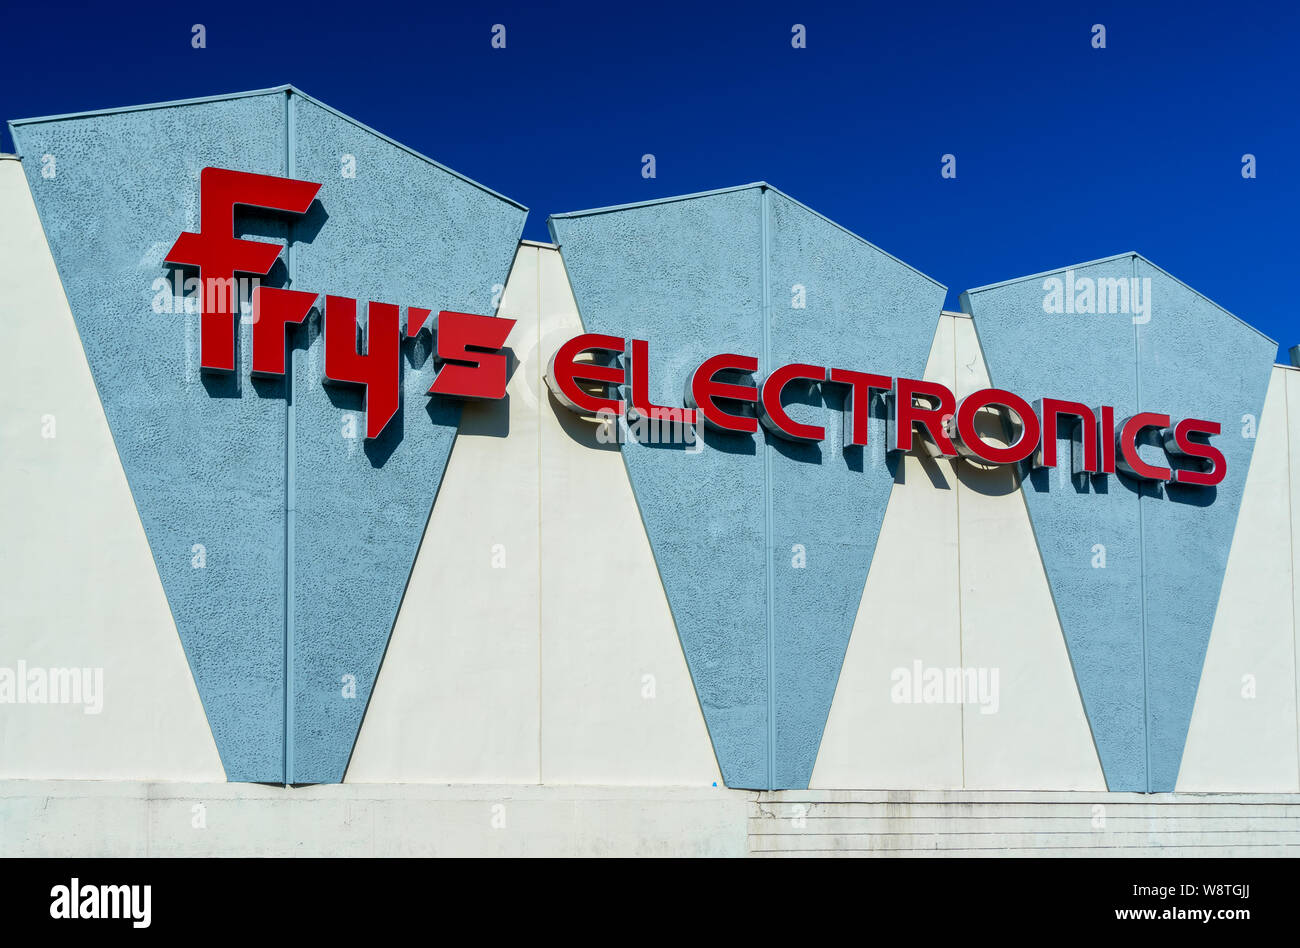 BURBANK, CA/USA - SEPTEMBER 19, 2015: Fry's Electronics store exterior. Fry's is a big-box store retailer of software, consumer electronics, household Stock Photo